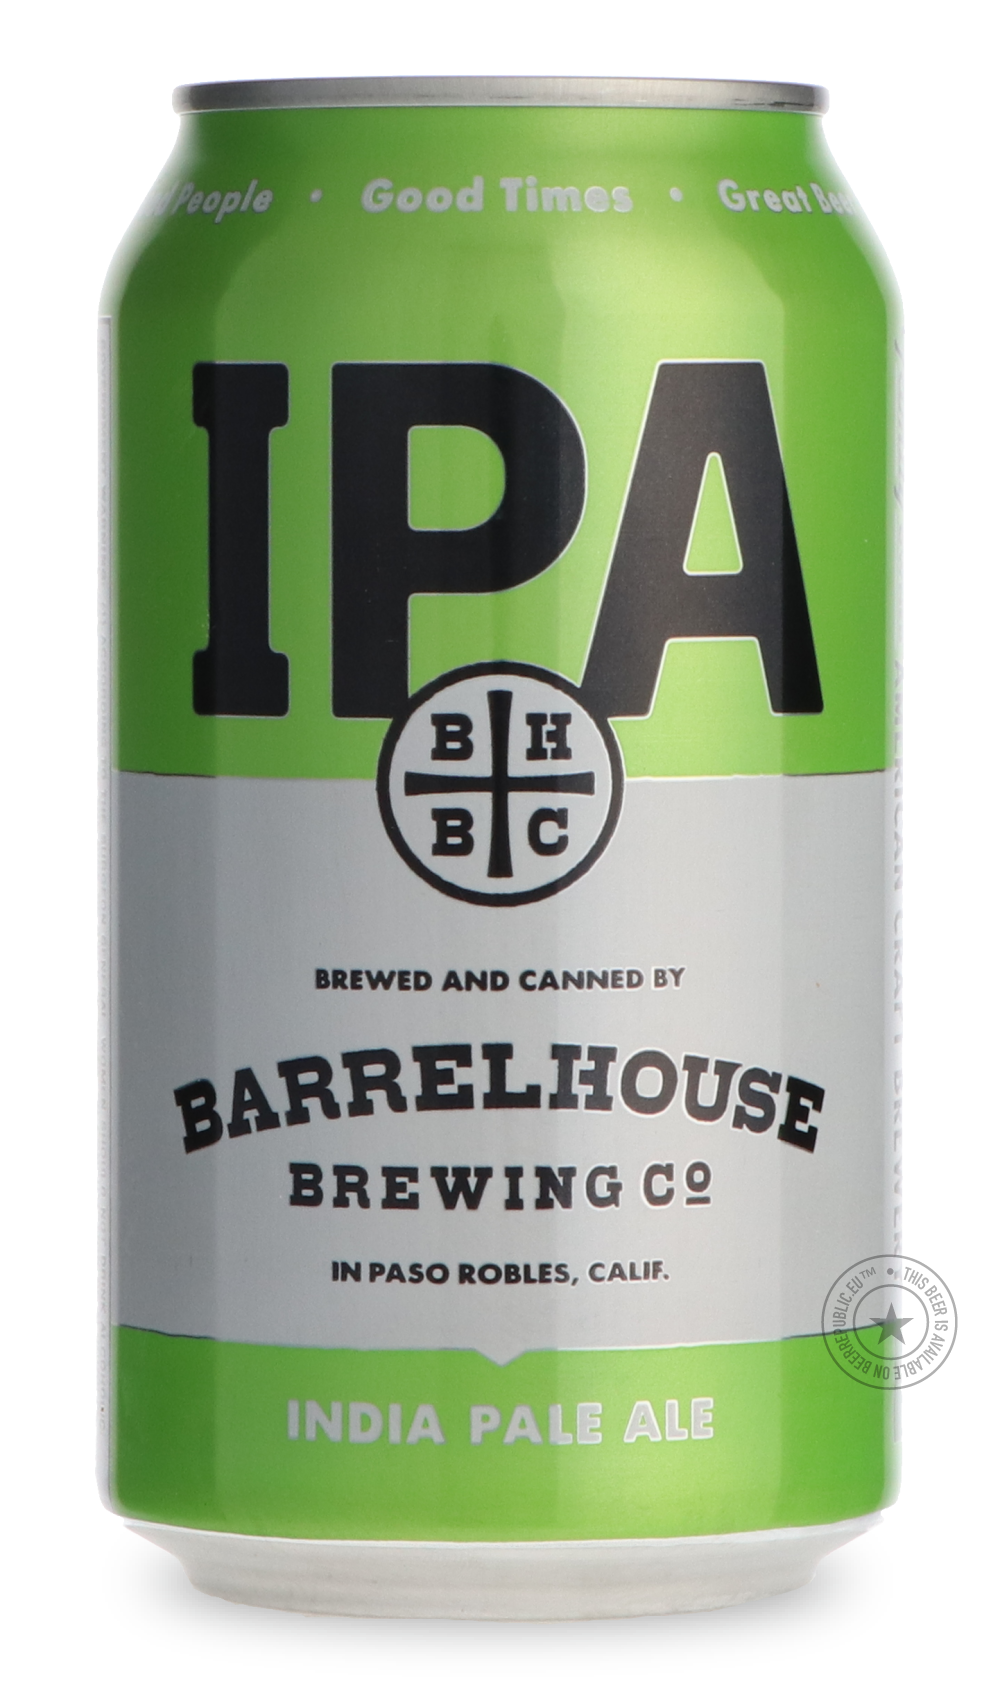 -BarrelHouse- Barrelhouse IPA-IPA- Only @ Beer Republic - The best online beer store for American & Canadian craft beer - Buy beer online from the USA and Canada - Bier online kopen - Amerikaans bier kopen - Craft beer store - Craft beer kopen - Amerikanisch bier kaufen - Bier online kaufen - Acheter biere online - IPA - Stout - Porter - New England IPA - Hazy IPA - Imperial Stout - Barrel Aged - Barrel Aged Imperial Stout - Brown - Dark beer - Blond - Blonde - Pilsner - Lager - Wheat - Weizen - Amber - Bar